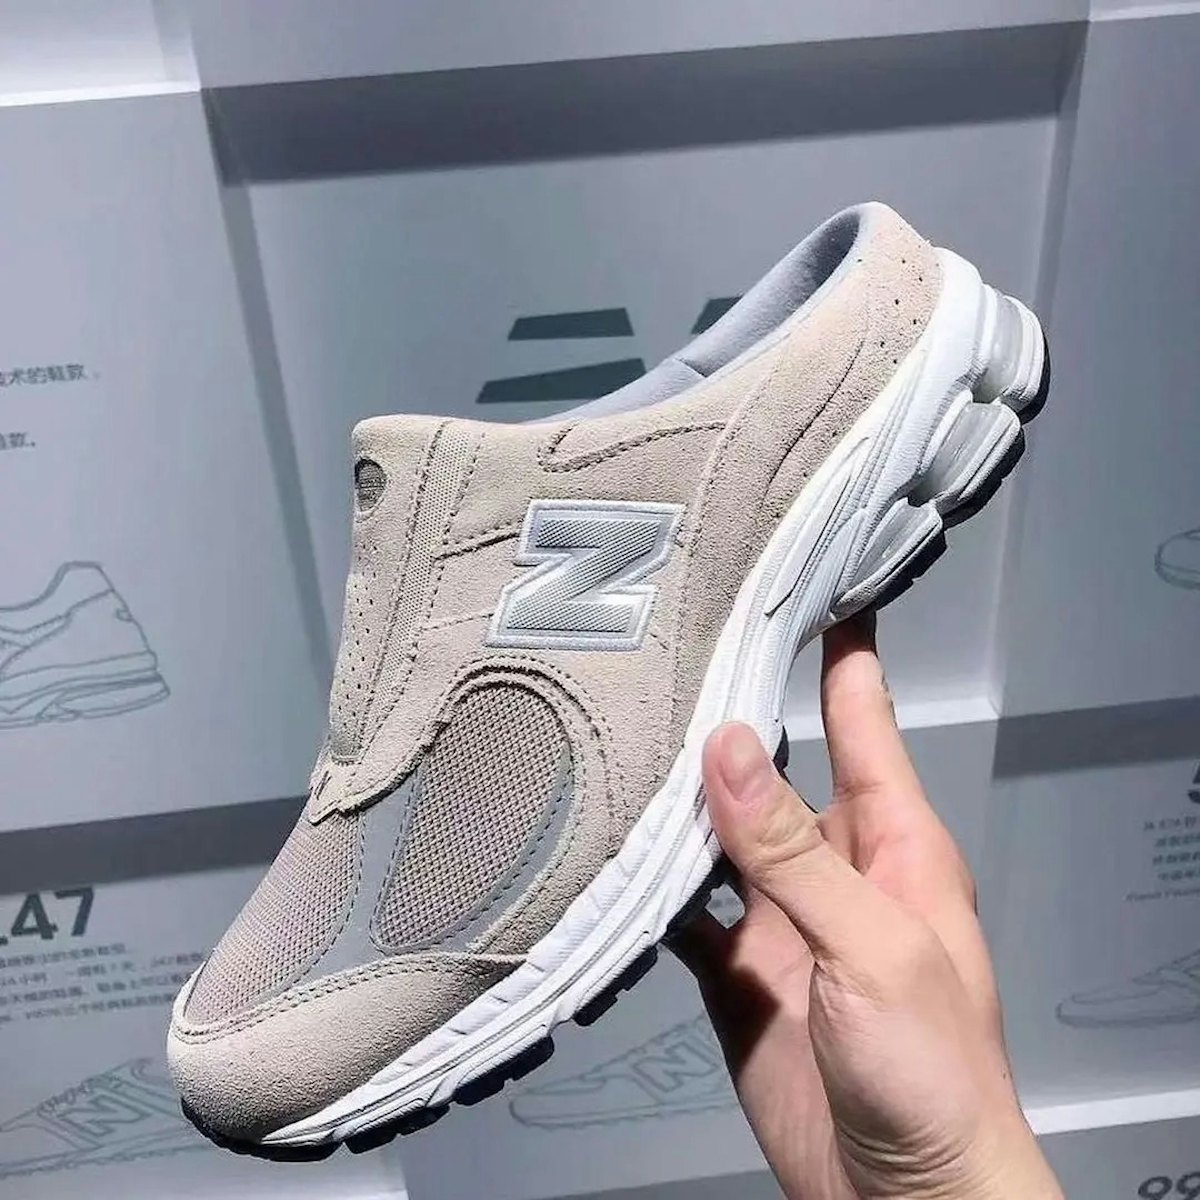 New Balance is turning its hit 2002R sneaker into a mule